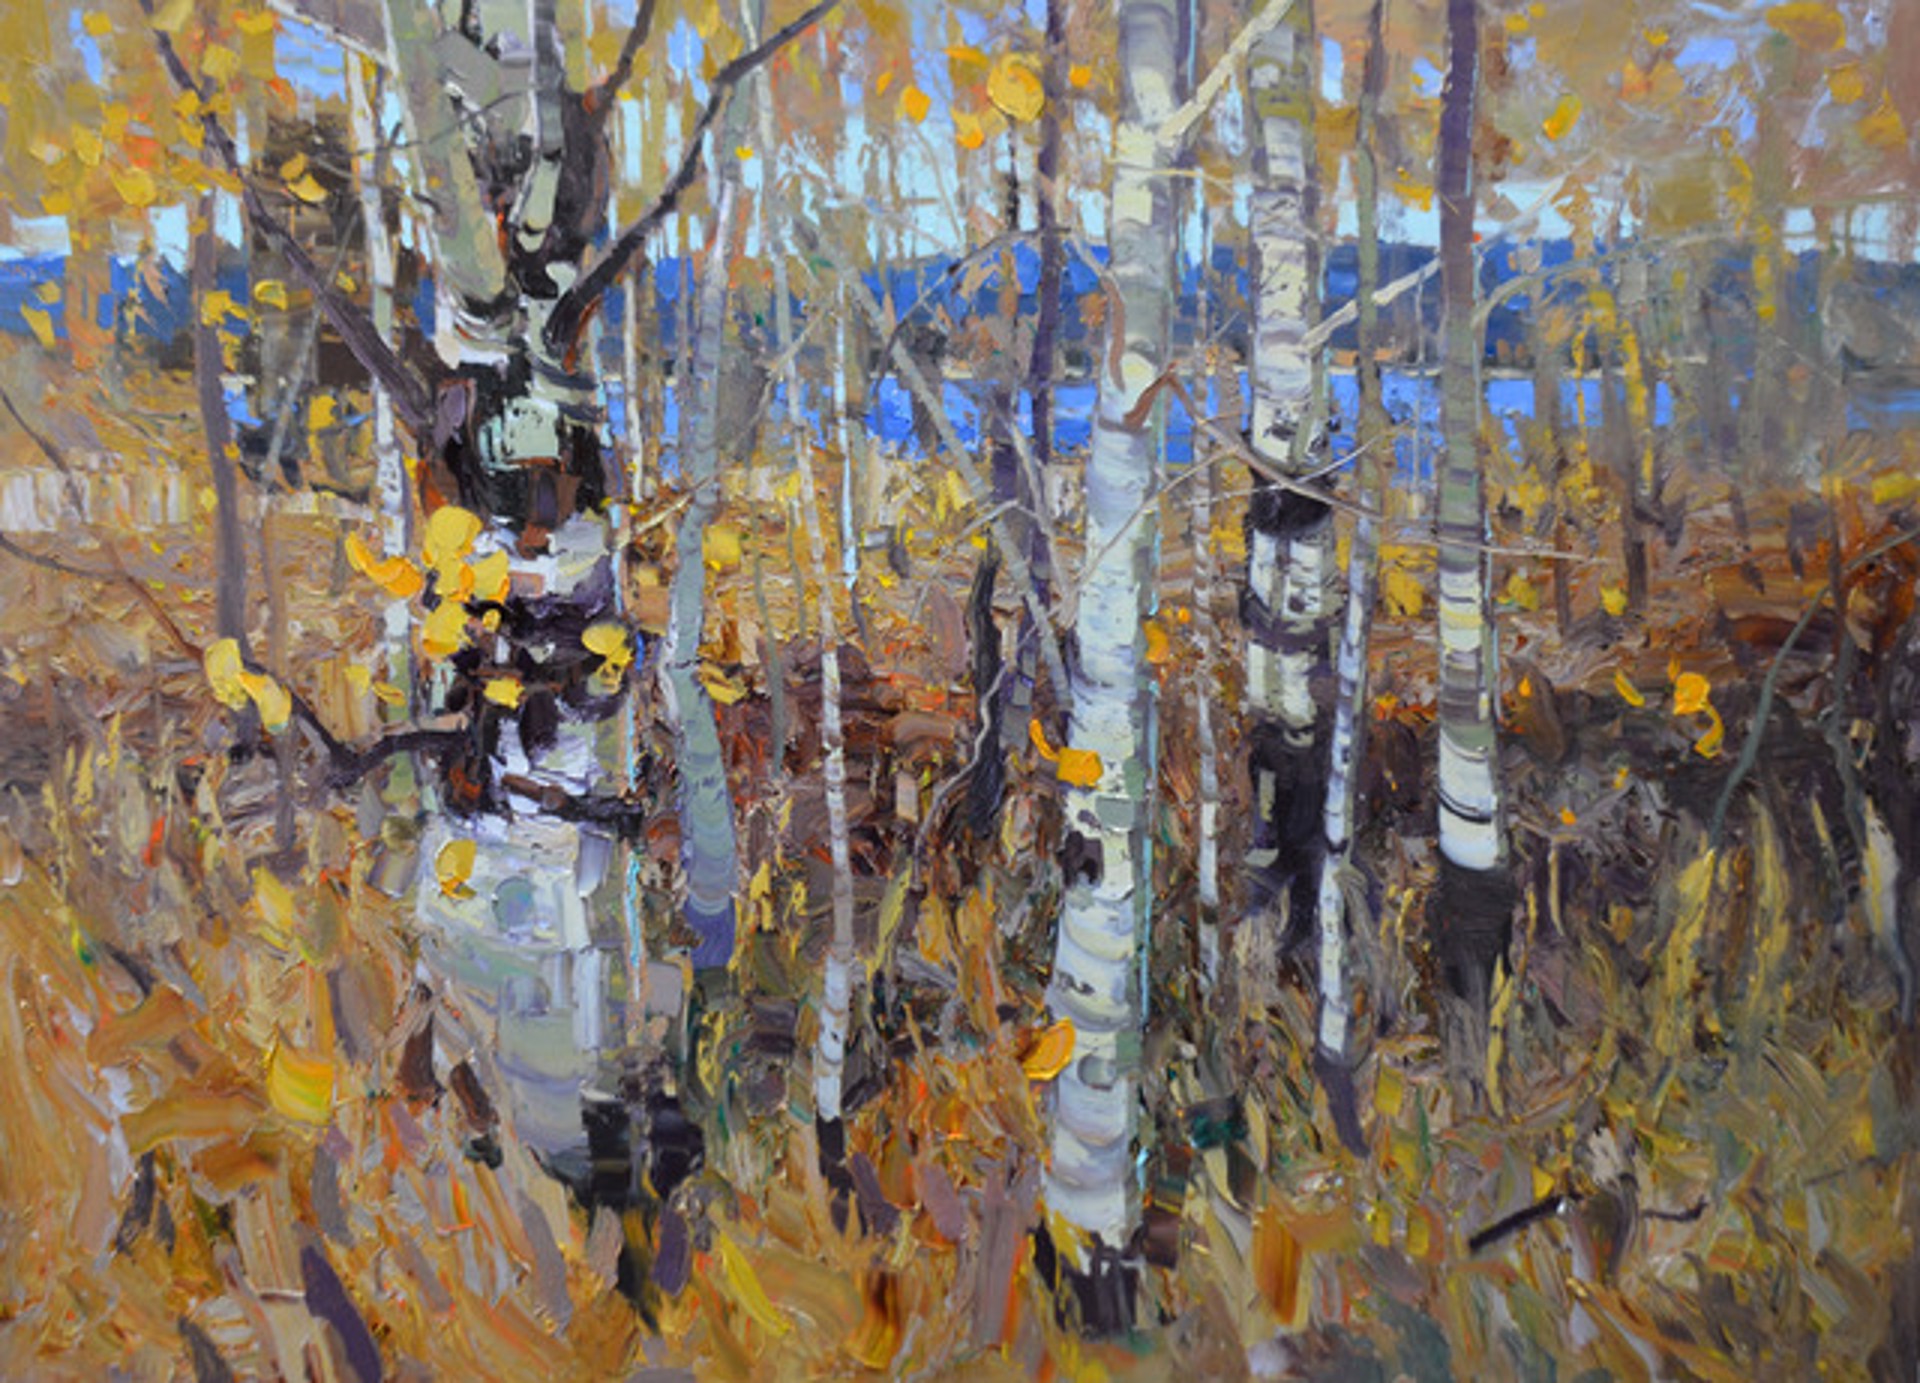 An Oil Painting Of A Grove Of Aspen Trees In The Fall With A Body Of Water And Mountain Seen Through The Trees